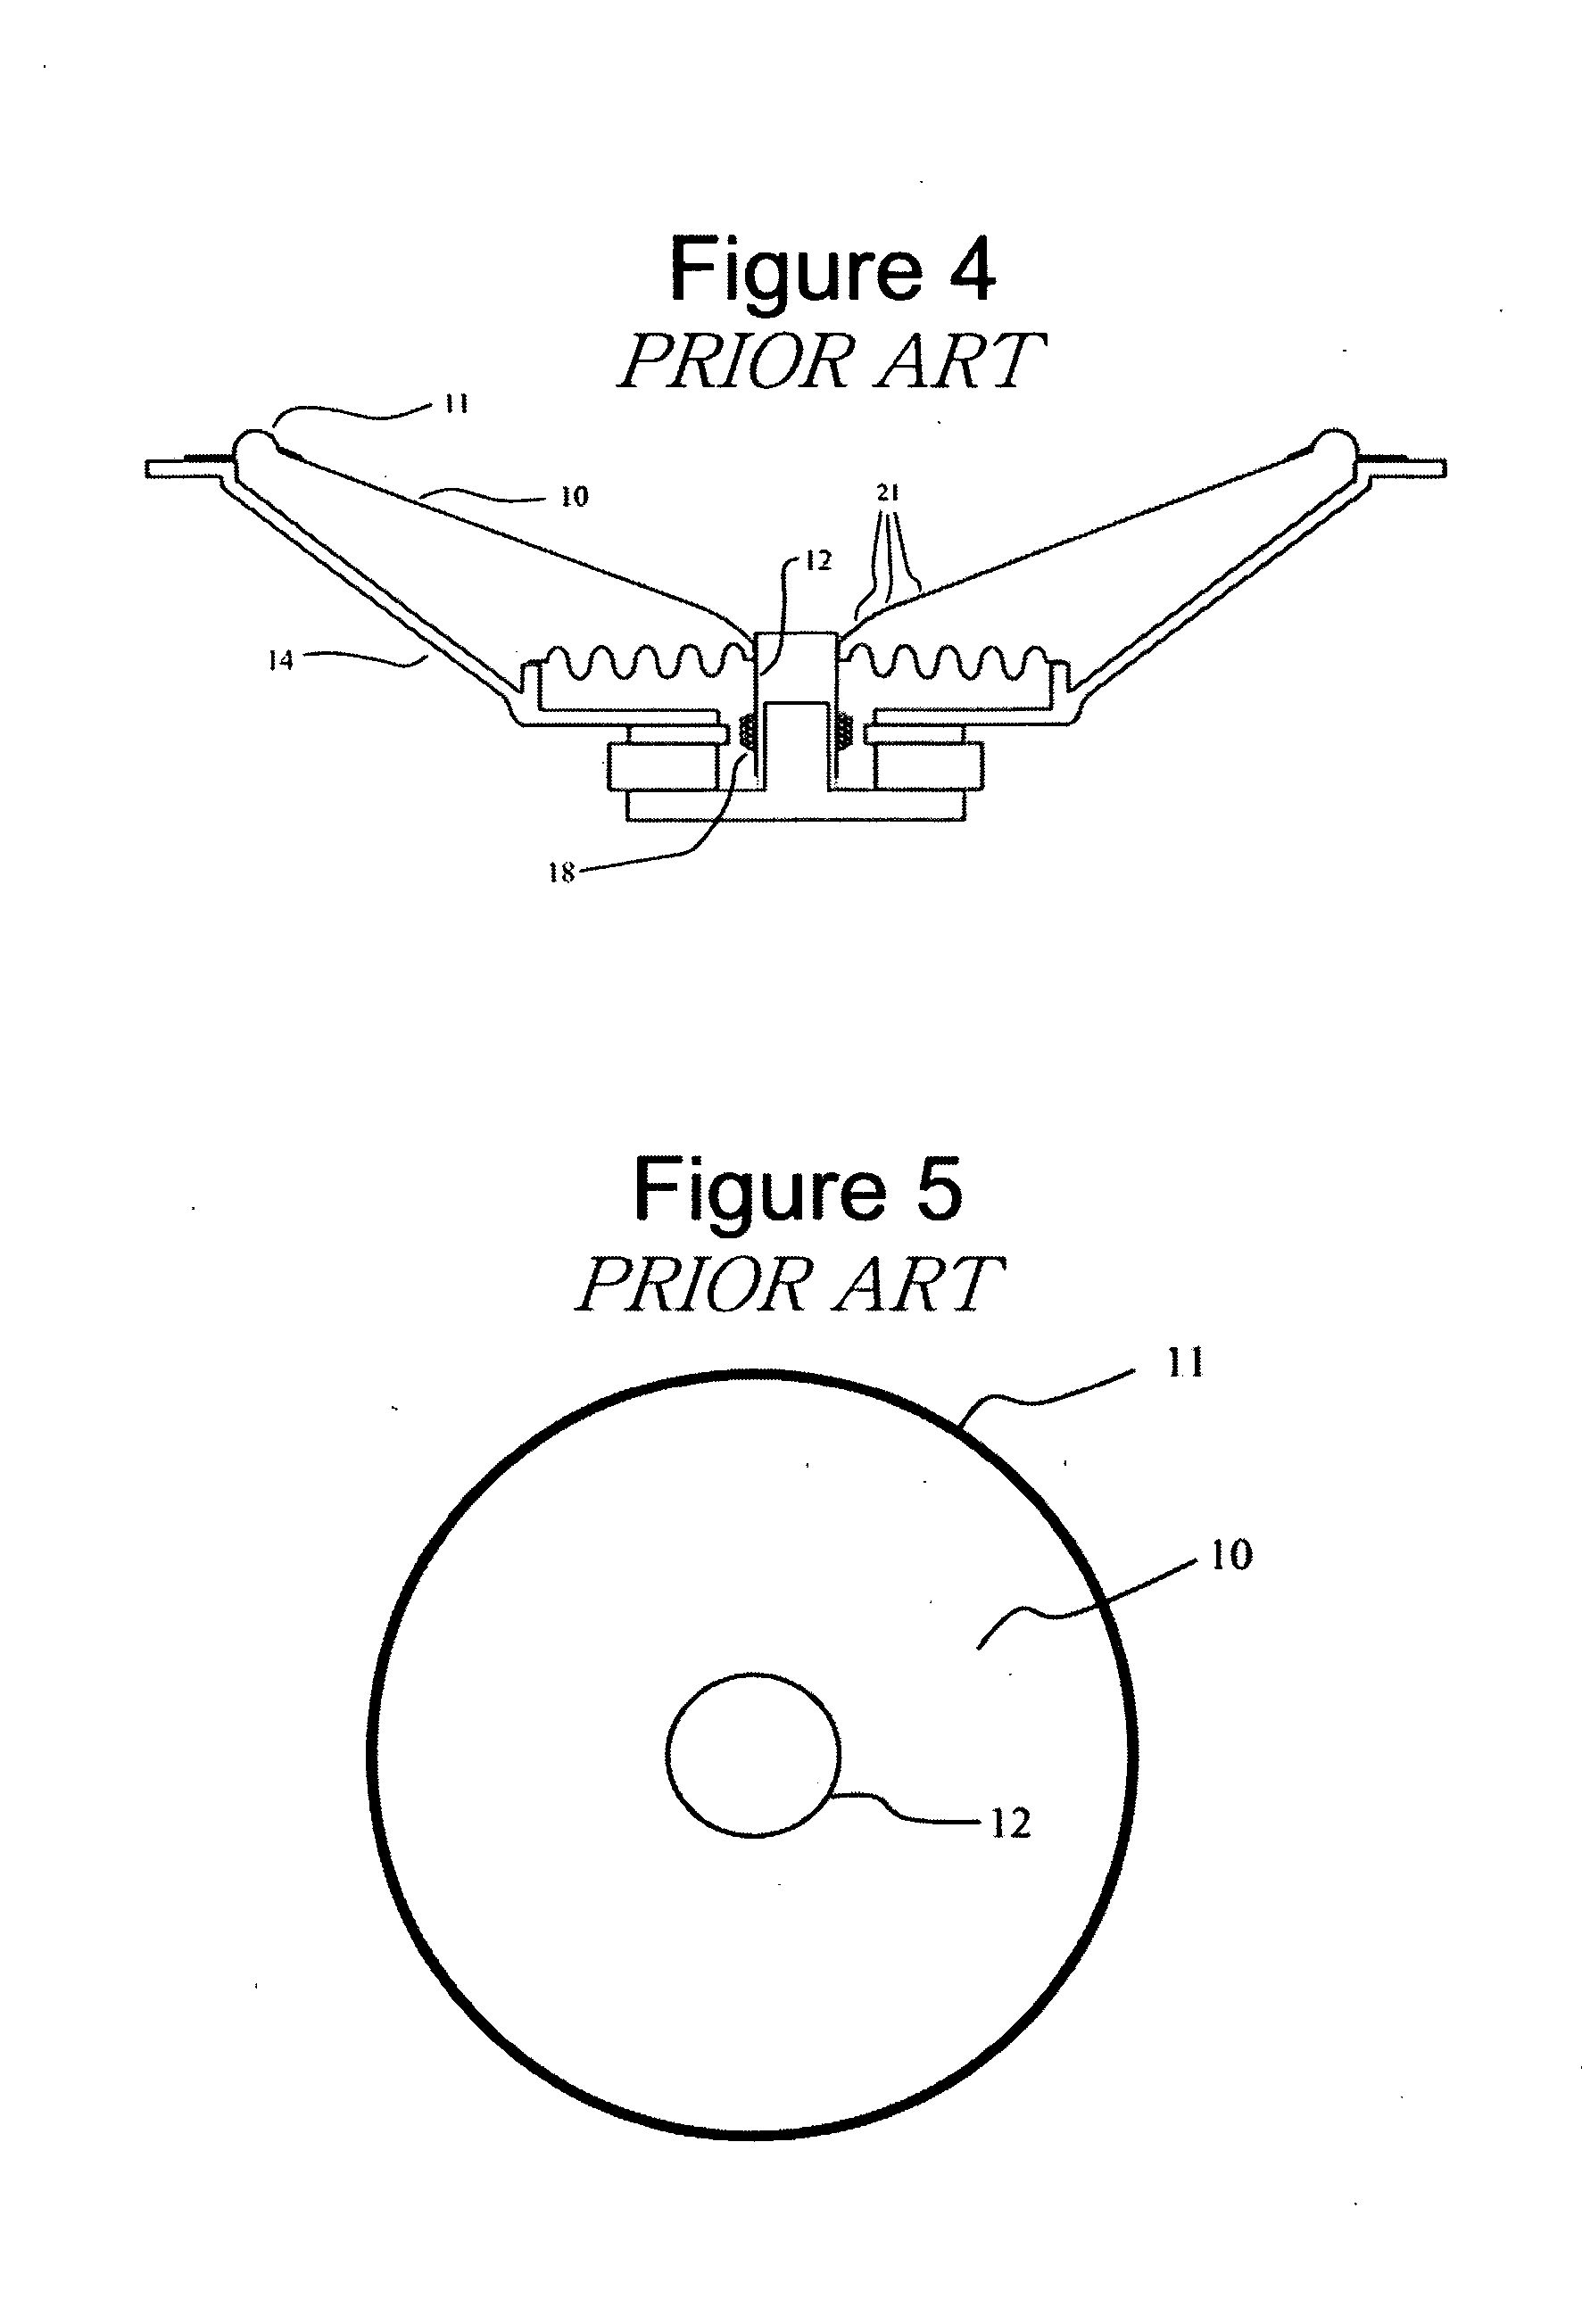 Method and apparatus for controlling material vibration modes in polymer and paper high performance speaker diaphragms